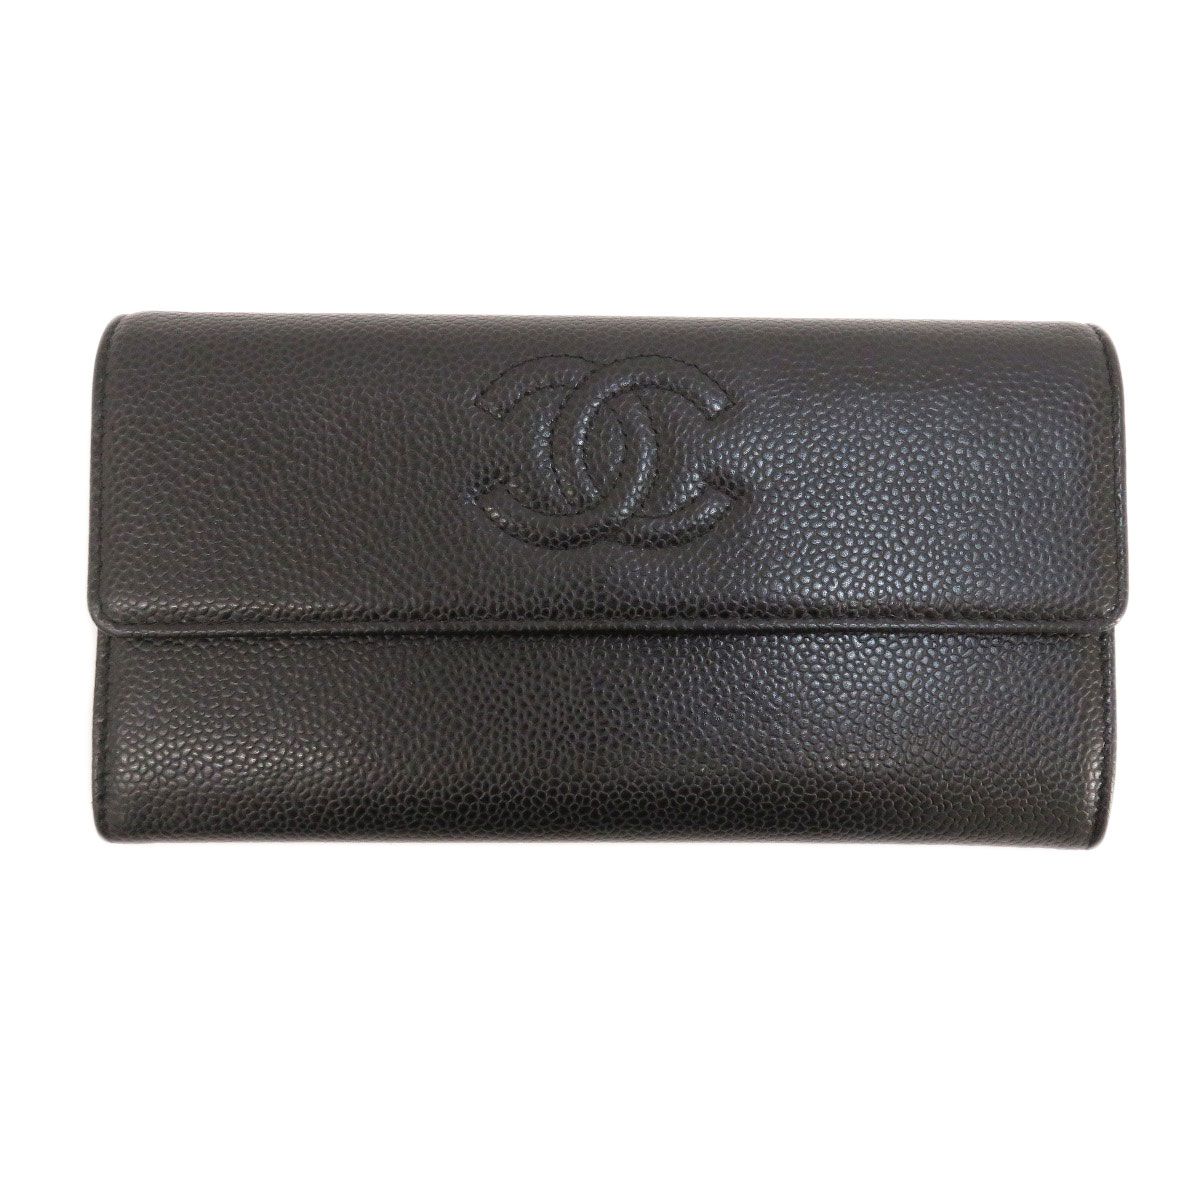 Chanel Chanel Cocomark Long Wallet Coin Purse Caviar Skin Black Size ONE SIZE - 1 Preview